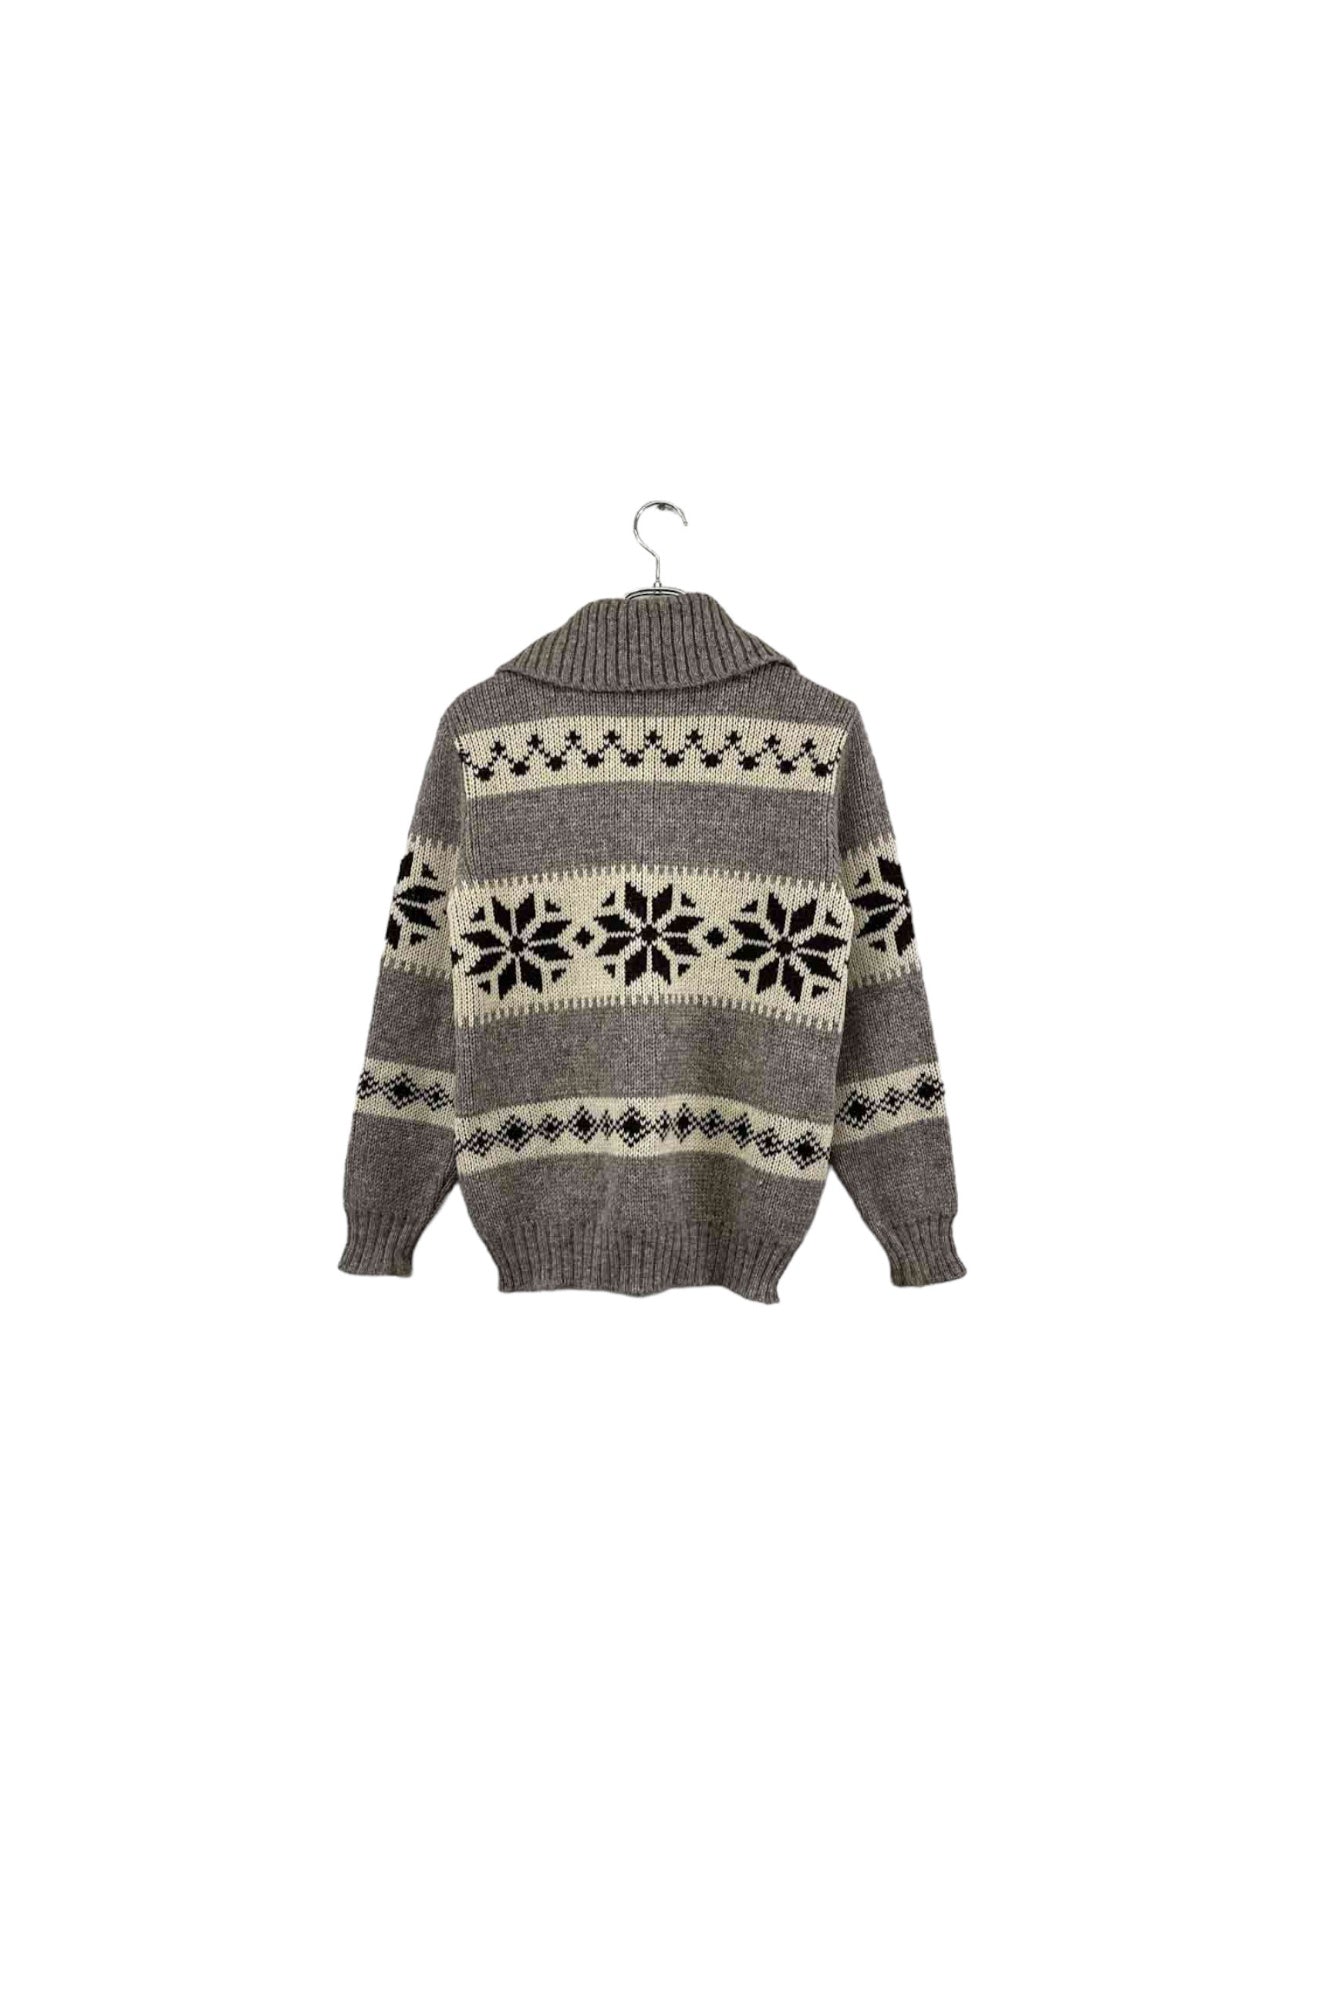 Made in CANADA BROWN BISON sweater